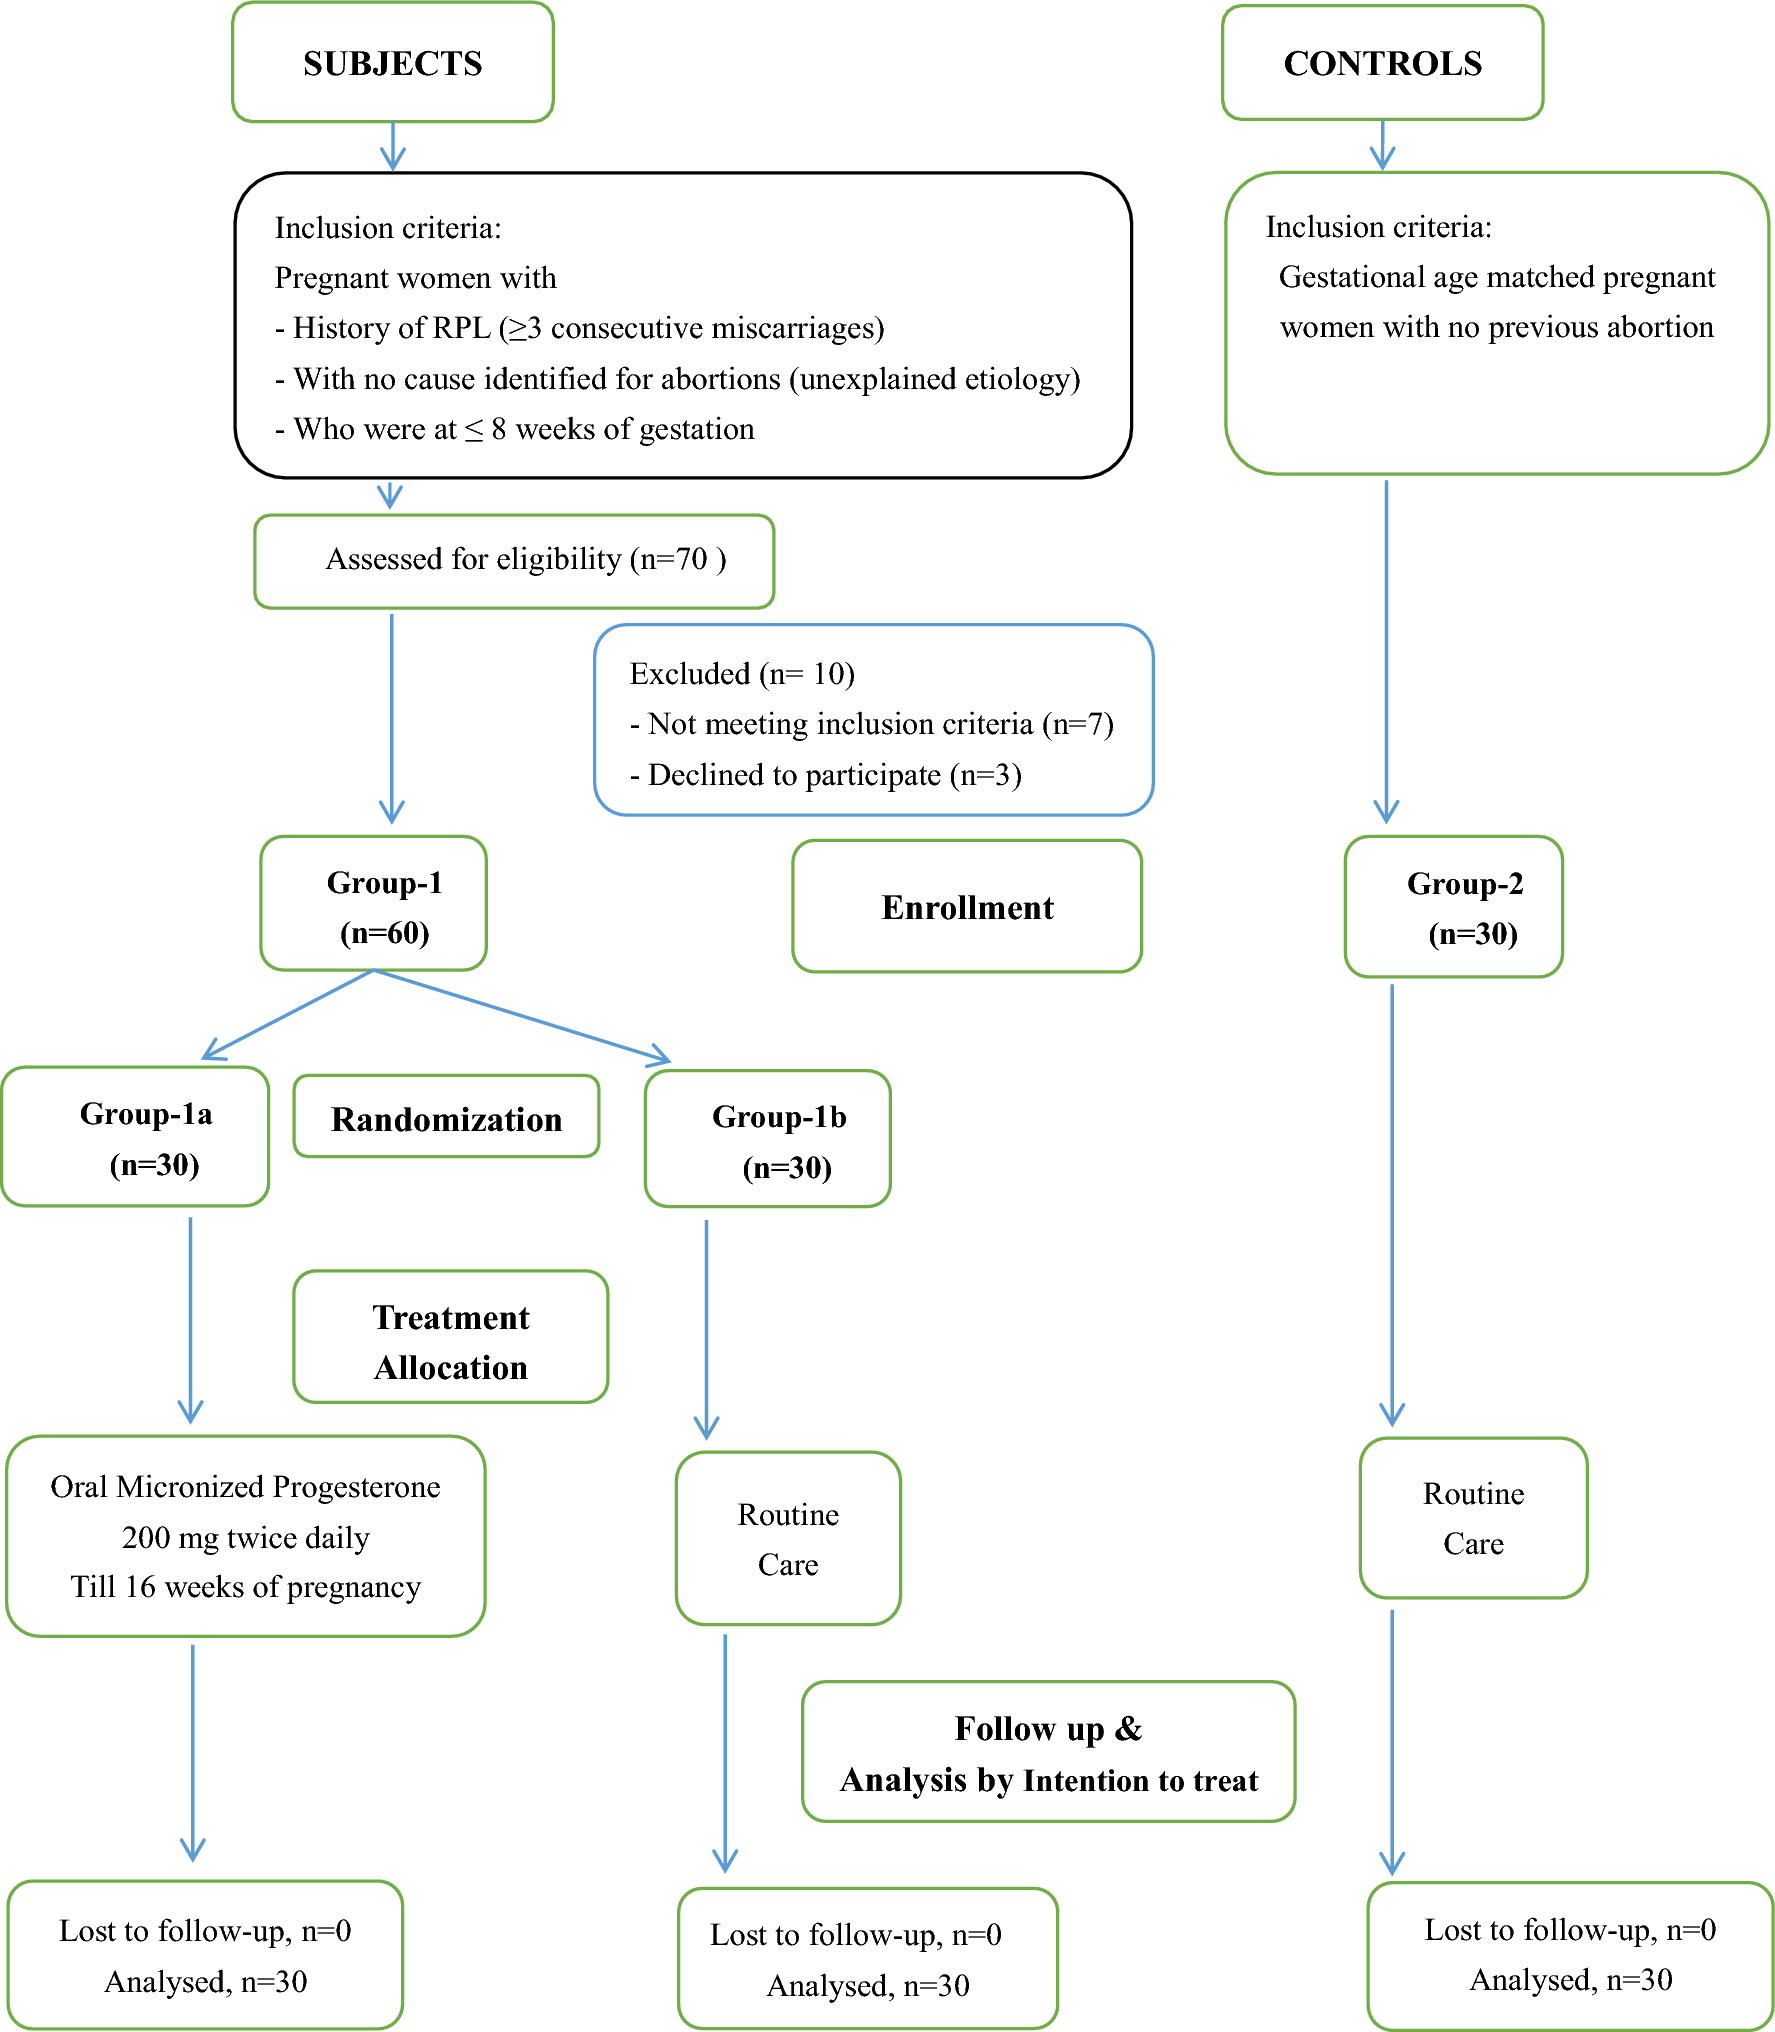 Cytokines and Pentraxin 3 Levels in Unexplained Recurrent Pregnancy Loss: Role of Oral Micronized Progesterone Therapy as Immunomodulator on Their Levels and Pregnancy Outcome, a Prospective Comparative Study